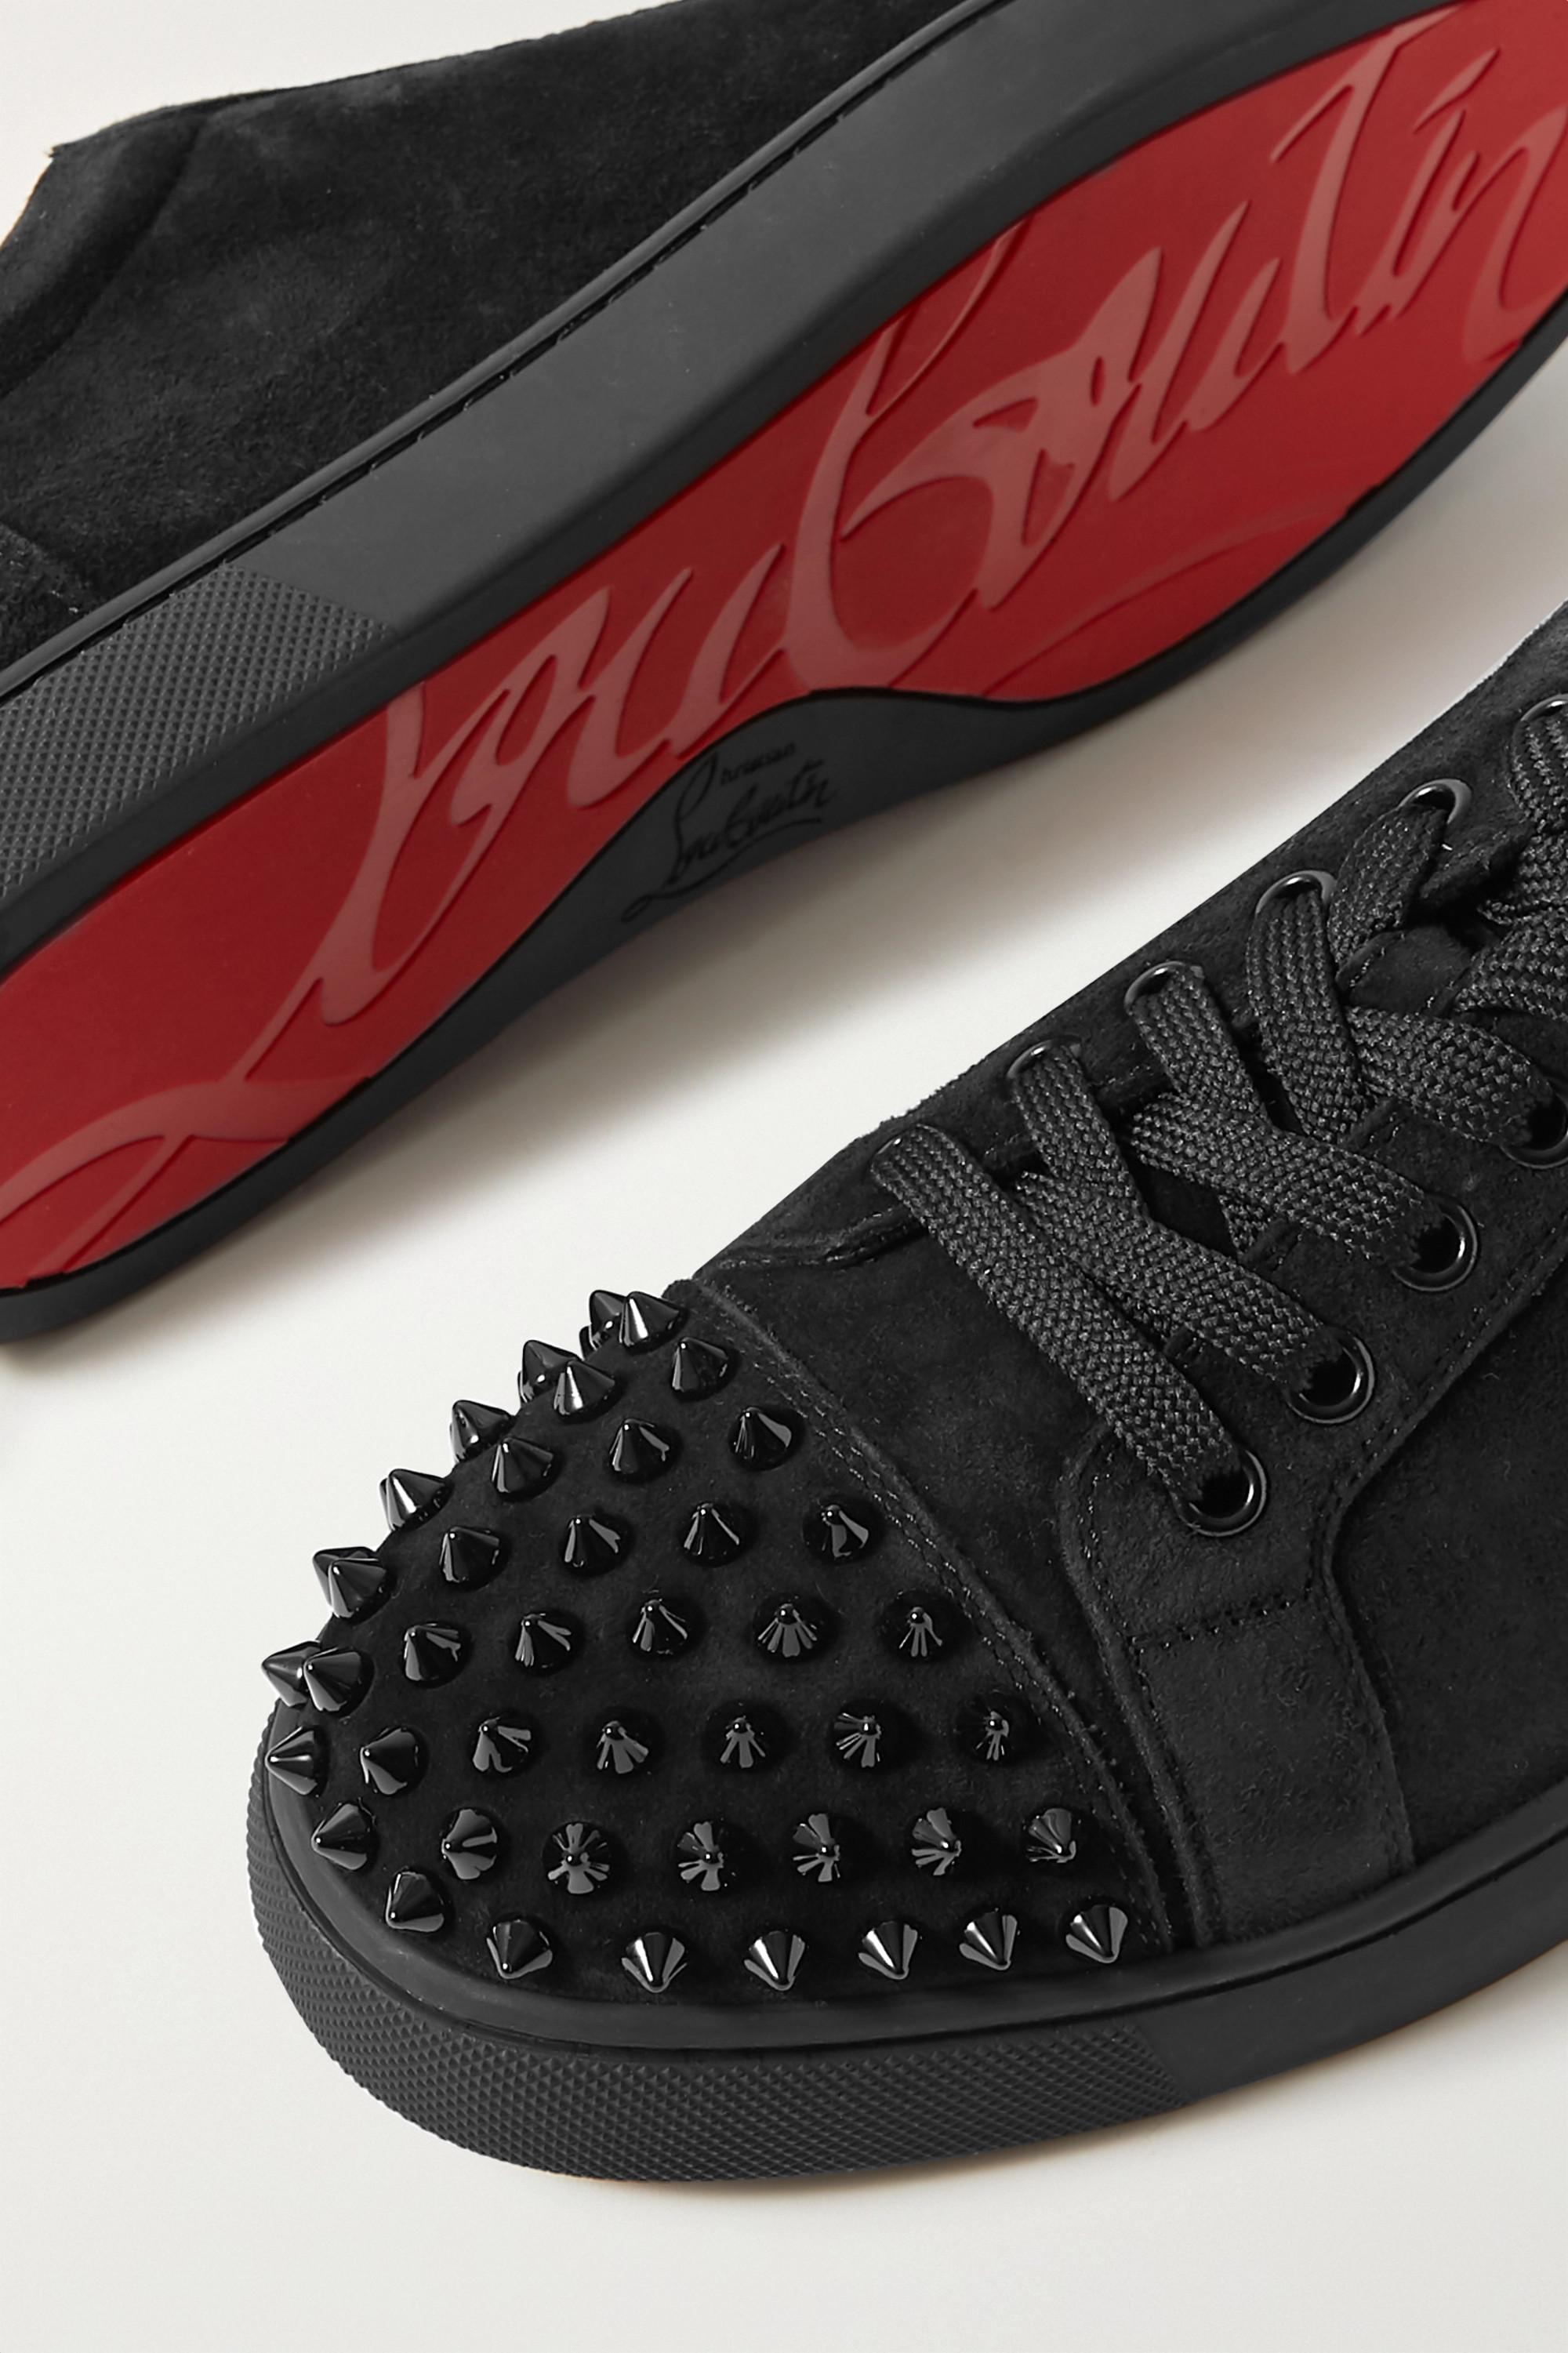 Christian Louboutin Vieira Spike Leather Sneaker in Black - Save 